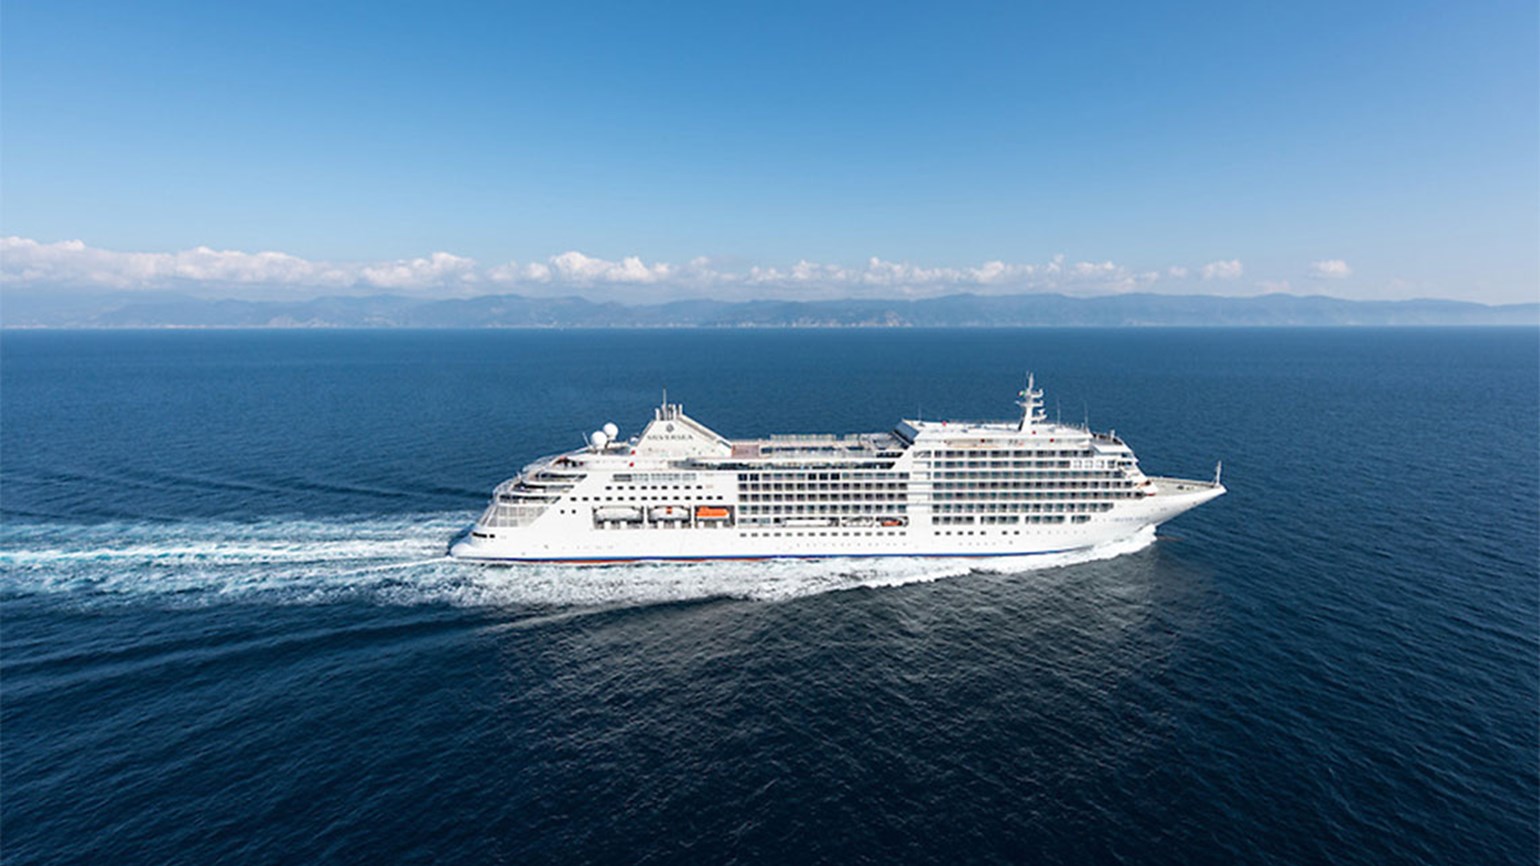 Luxury cruise line Silversea orders a new ship called the Silver Moon